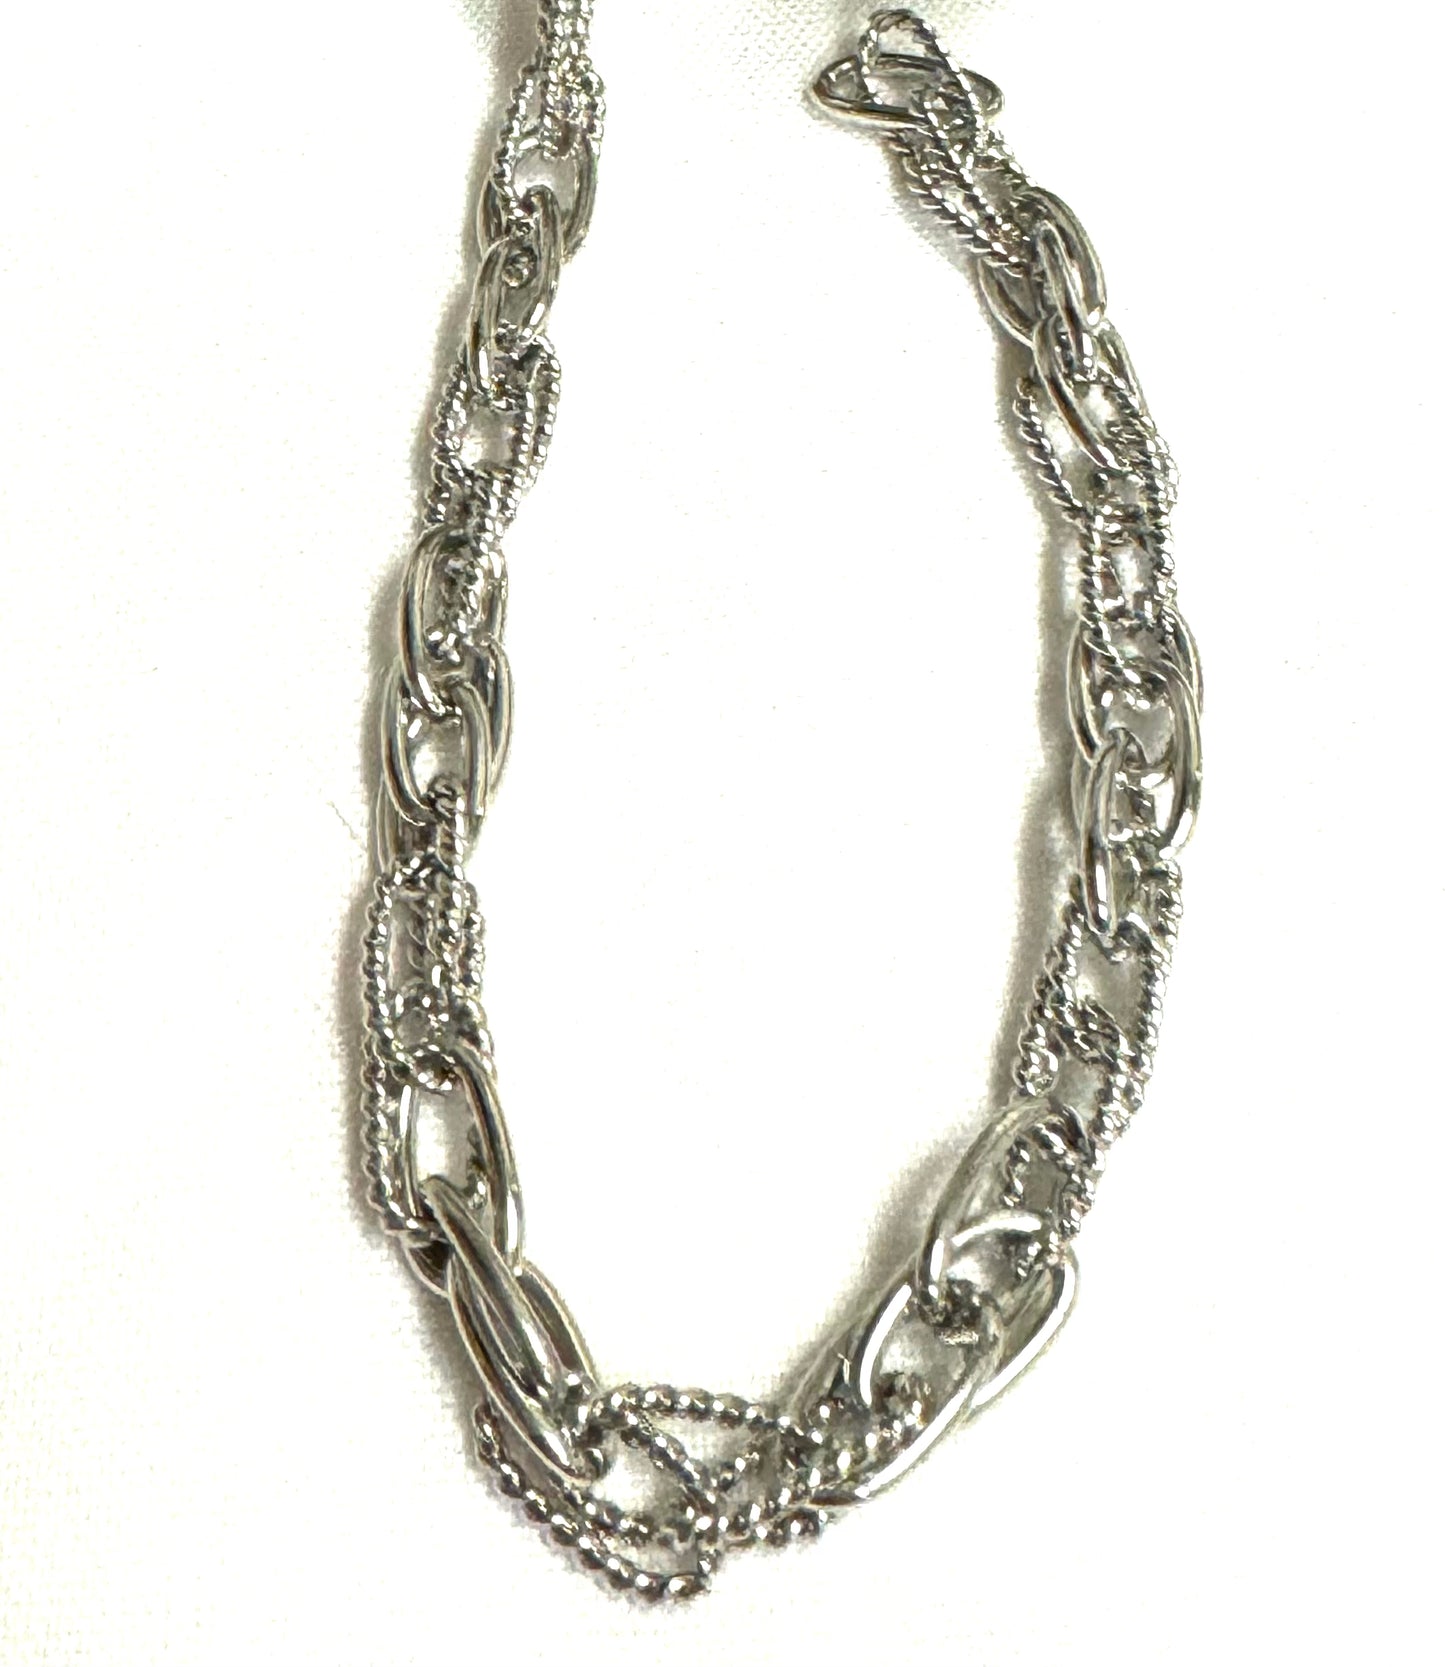 Stainless steel 4 oval chain